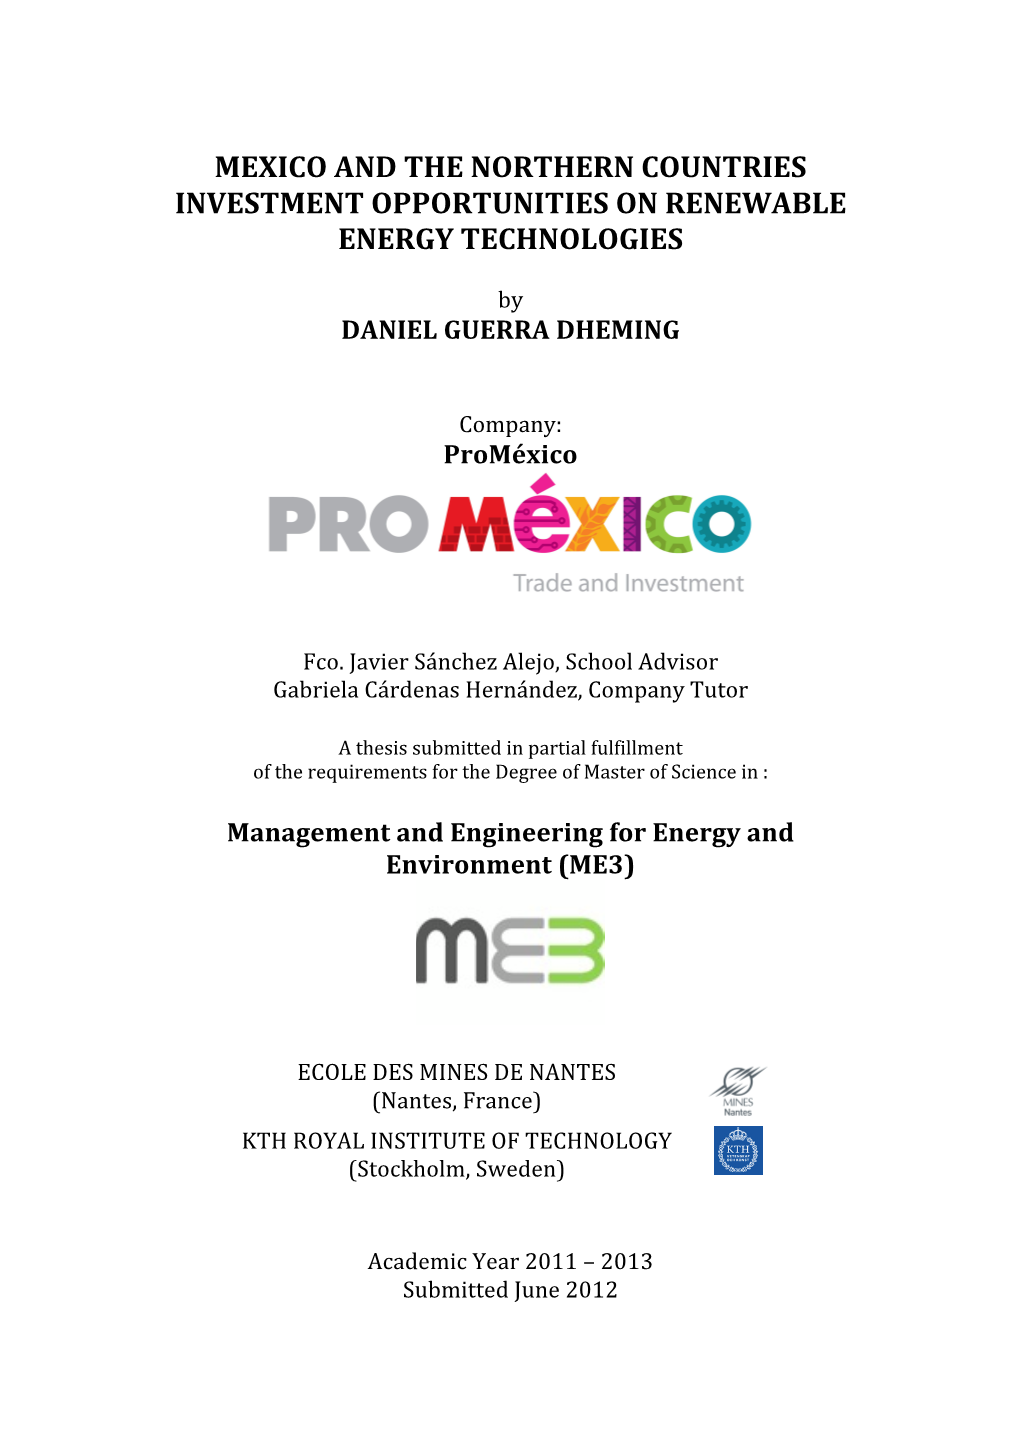 Mexico and the Northern Countries Investment Opportunities on Renewable Energy Technologies